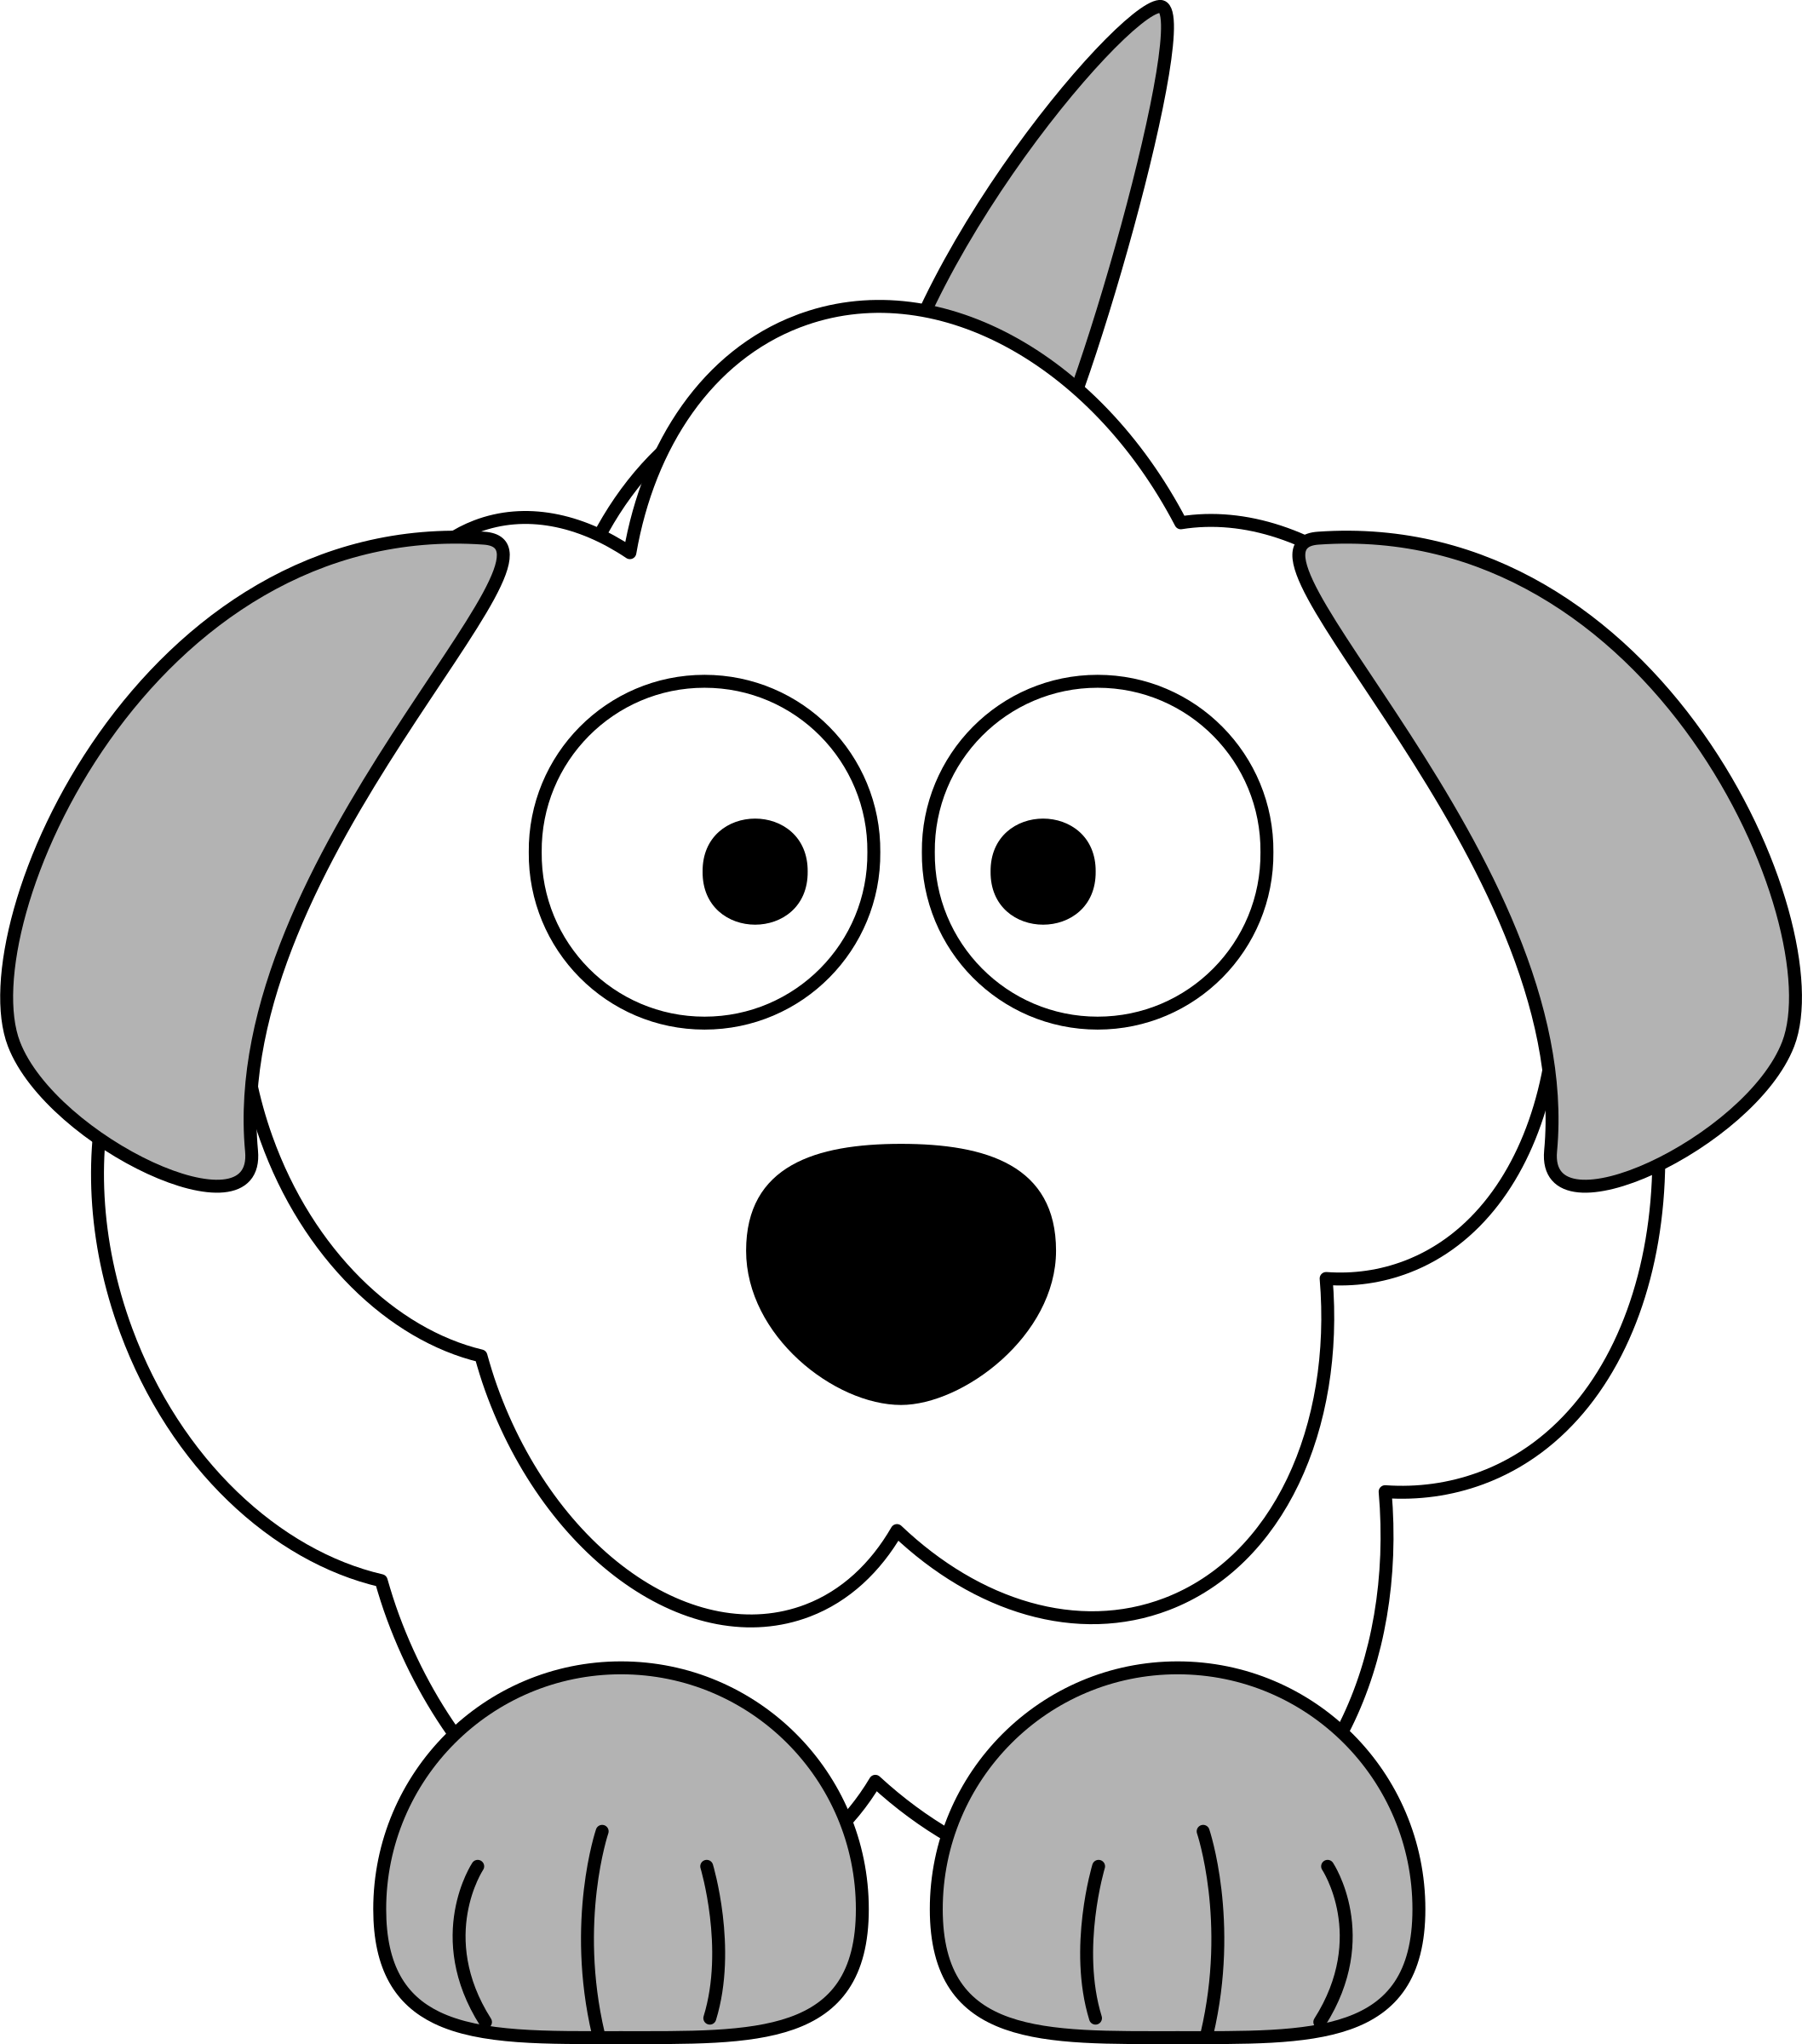 Clipart french poodle cartoon dog